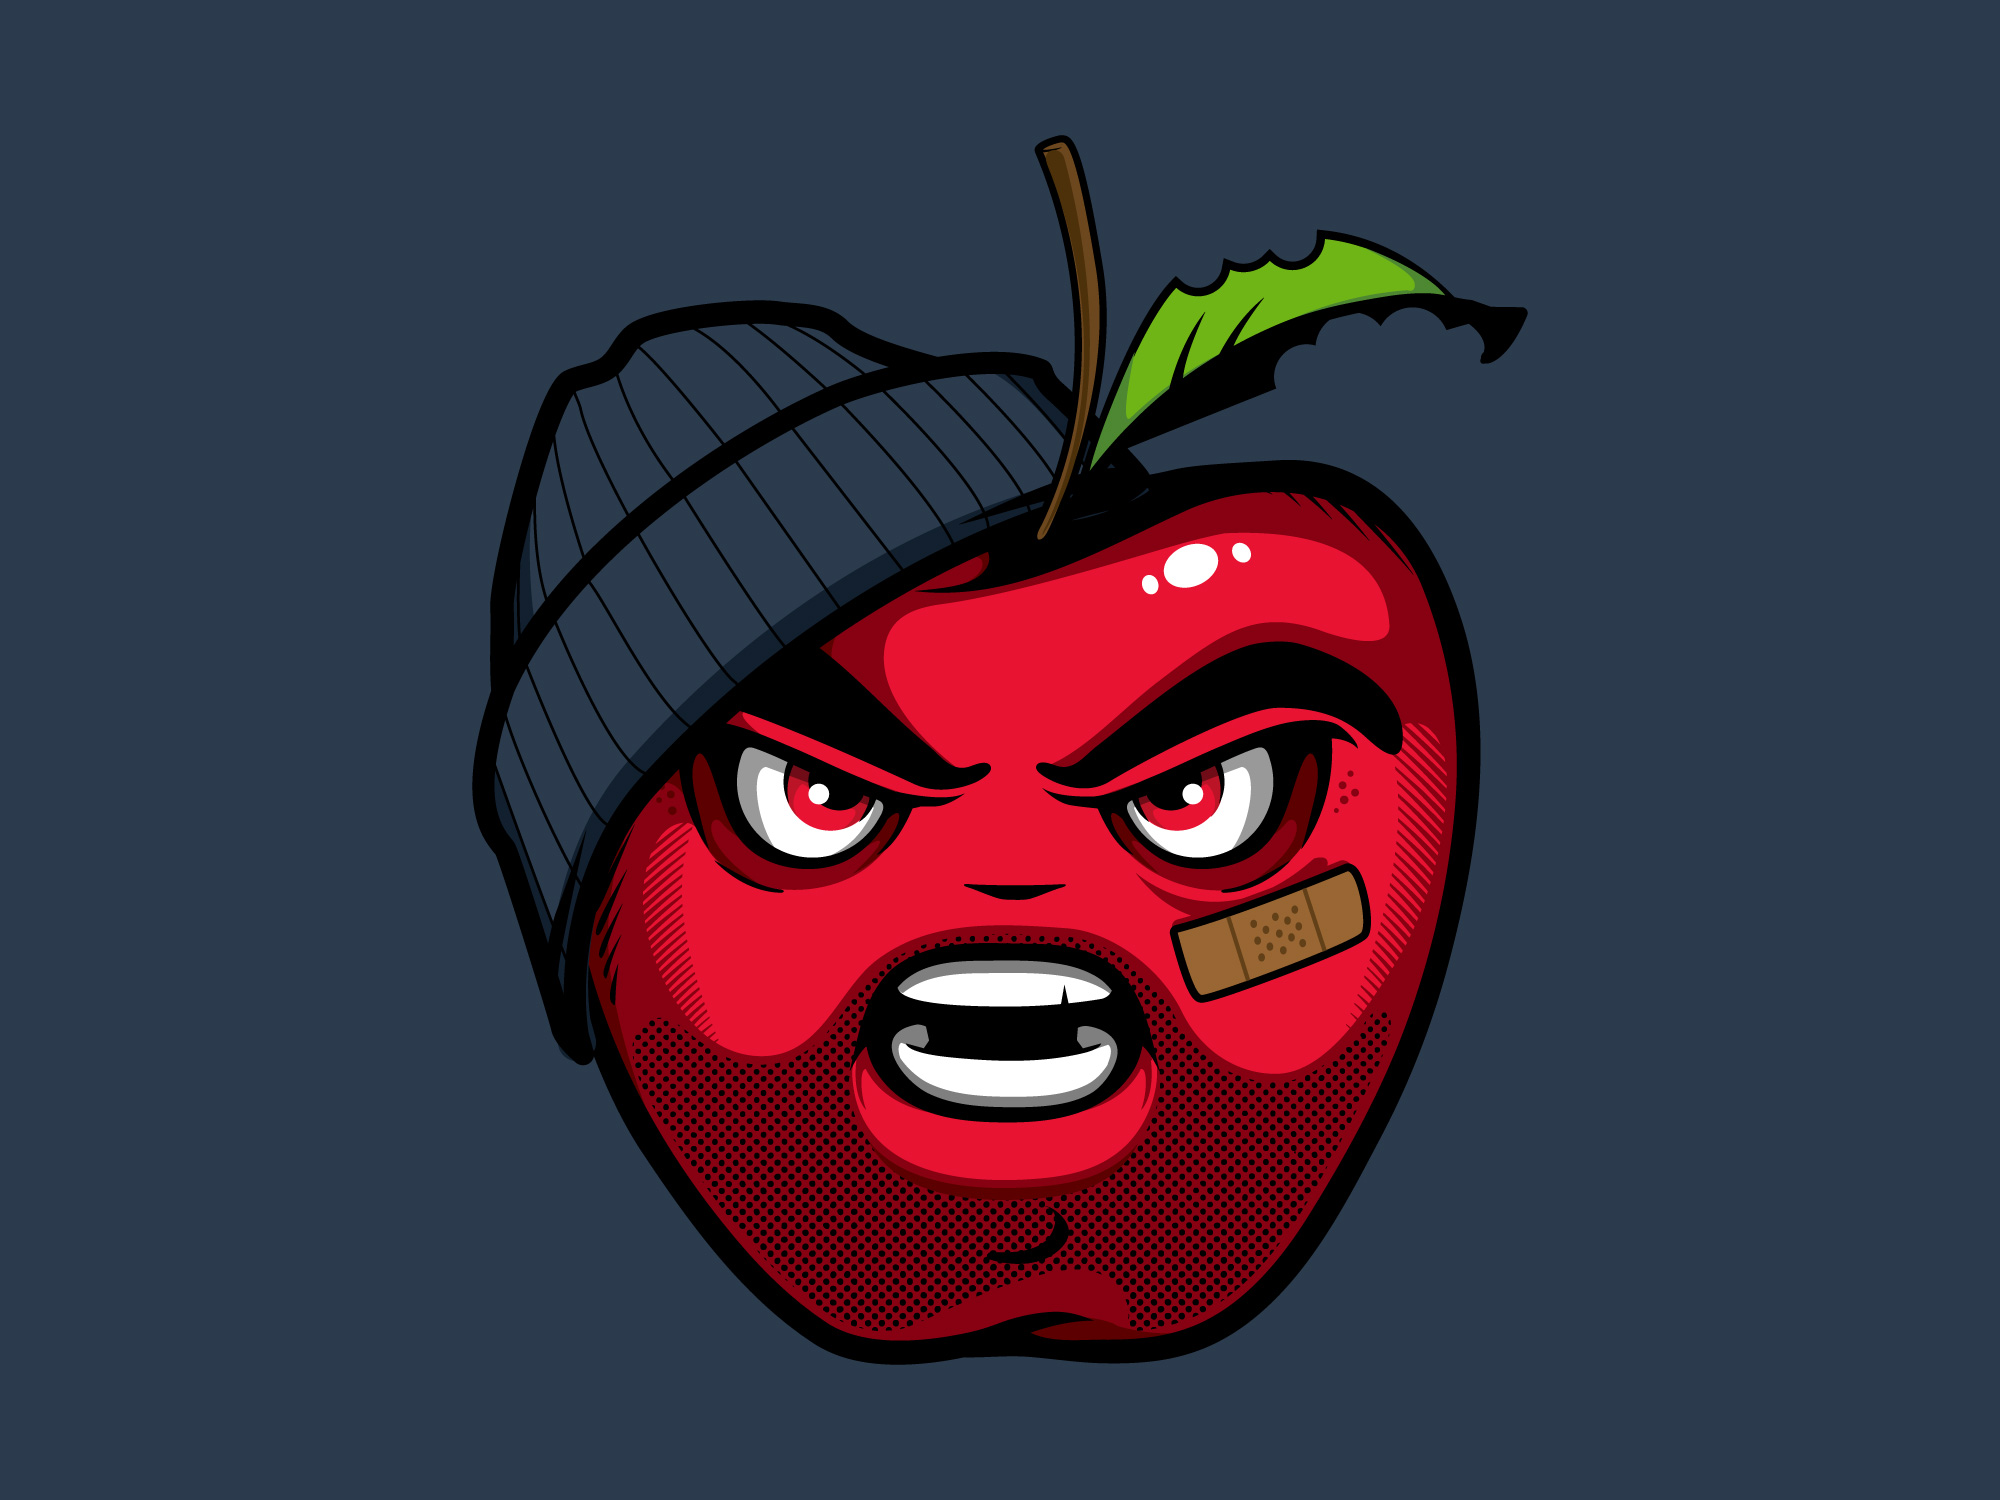 NYC-Rotten-Apple-Character-Mascot-Design-by-Old-Dirty-Dermot-Creative-Service-for-Hire